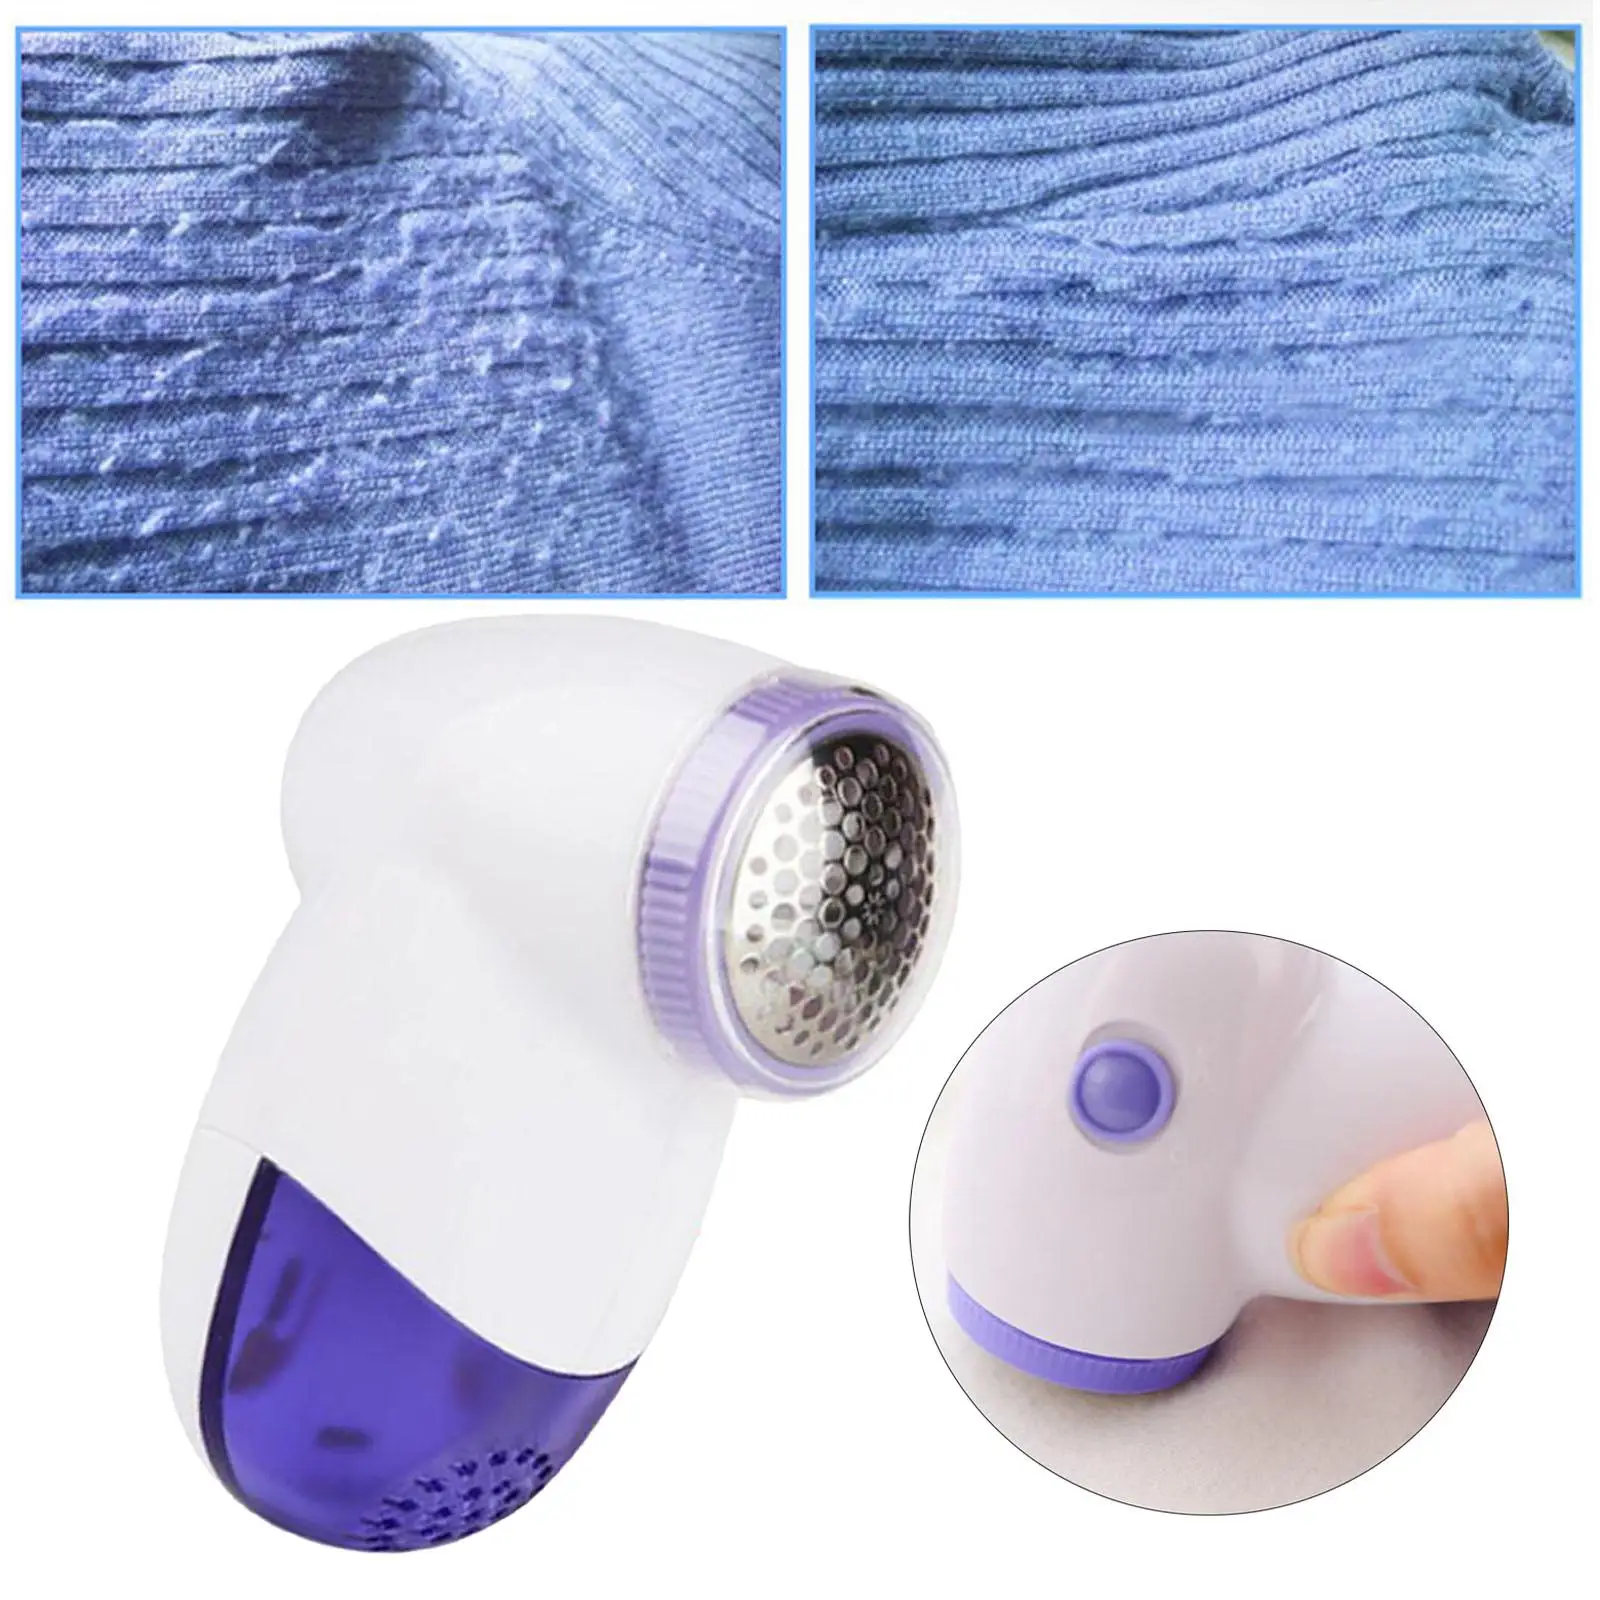 Mini Fuzz Remover Cleaning Tool Detachable Fabric Pilling Removal Machine for Woven Coat Pet Hair Blanket Car Seats Clothing